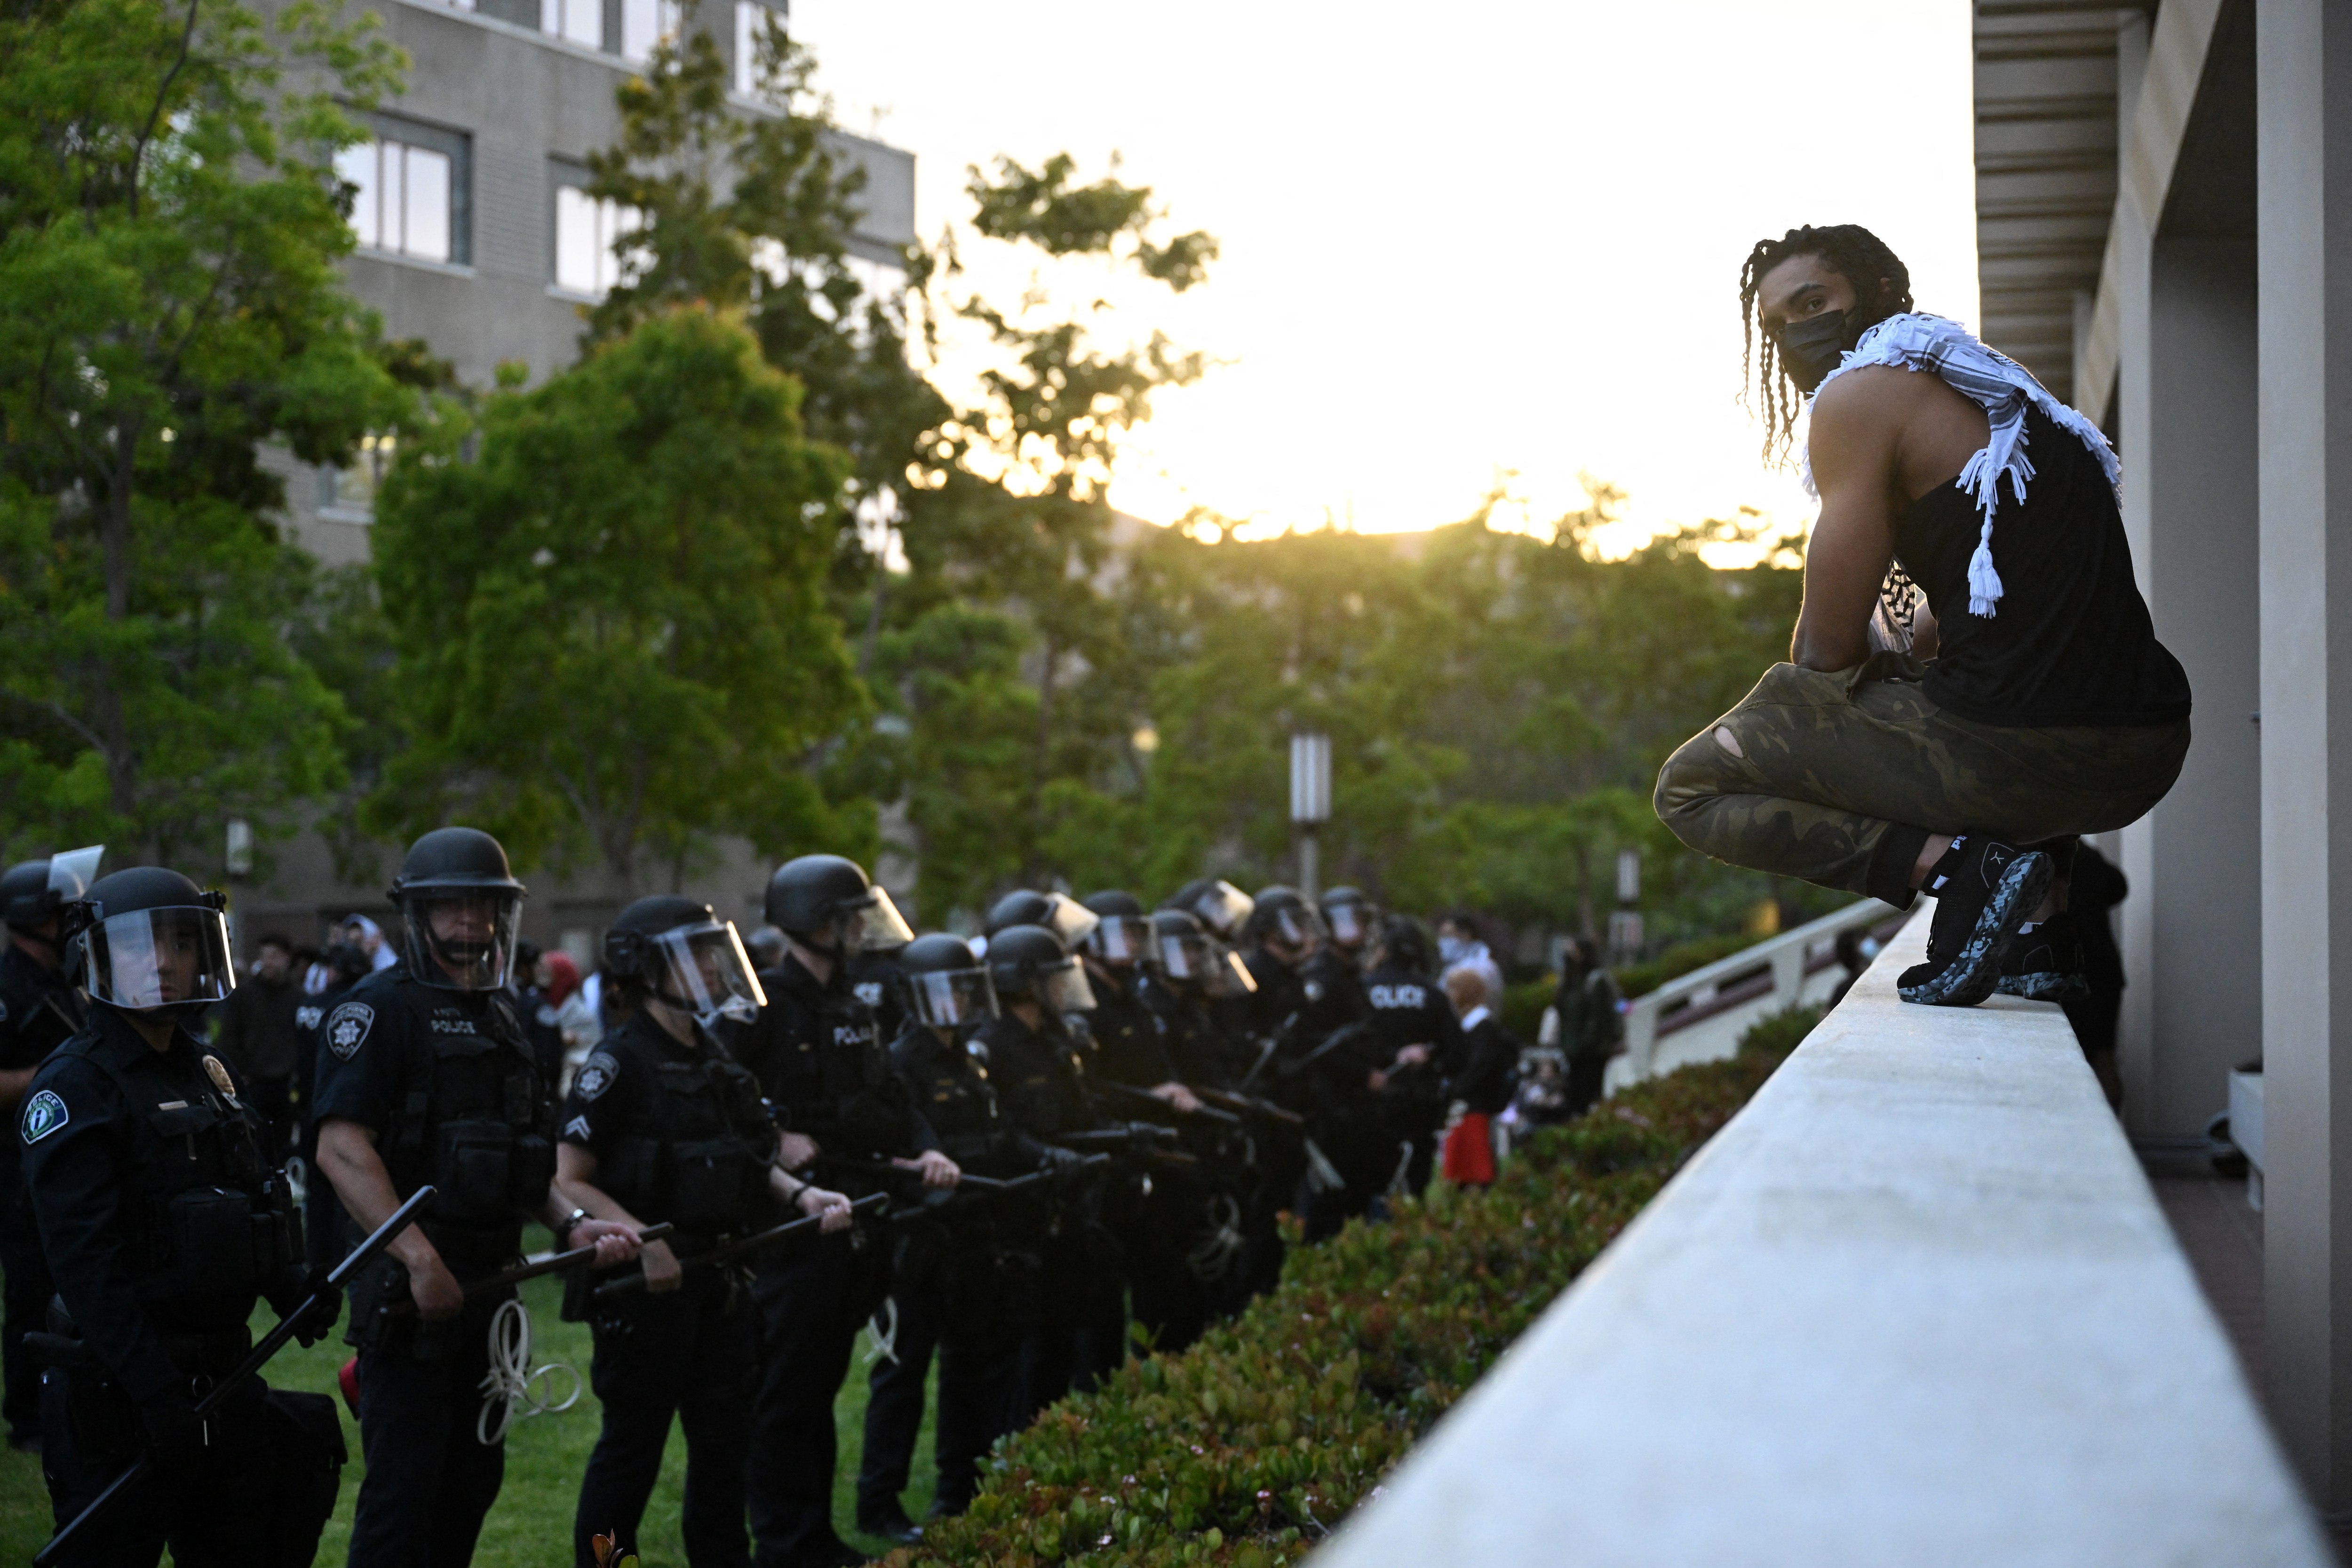 A pro-Palestinian demonstrator confronts police as they clear an encampment at the University of California, Irvine